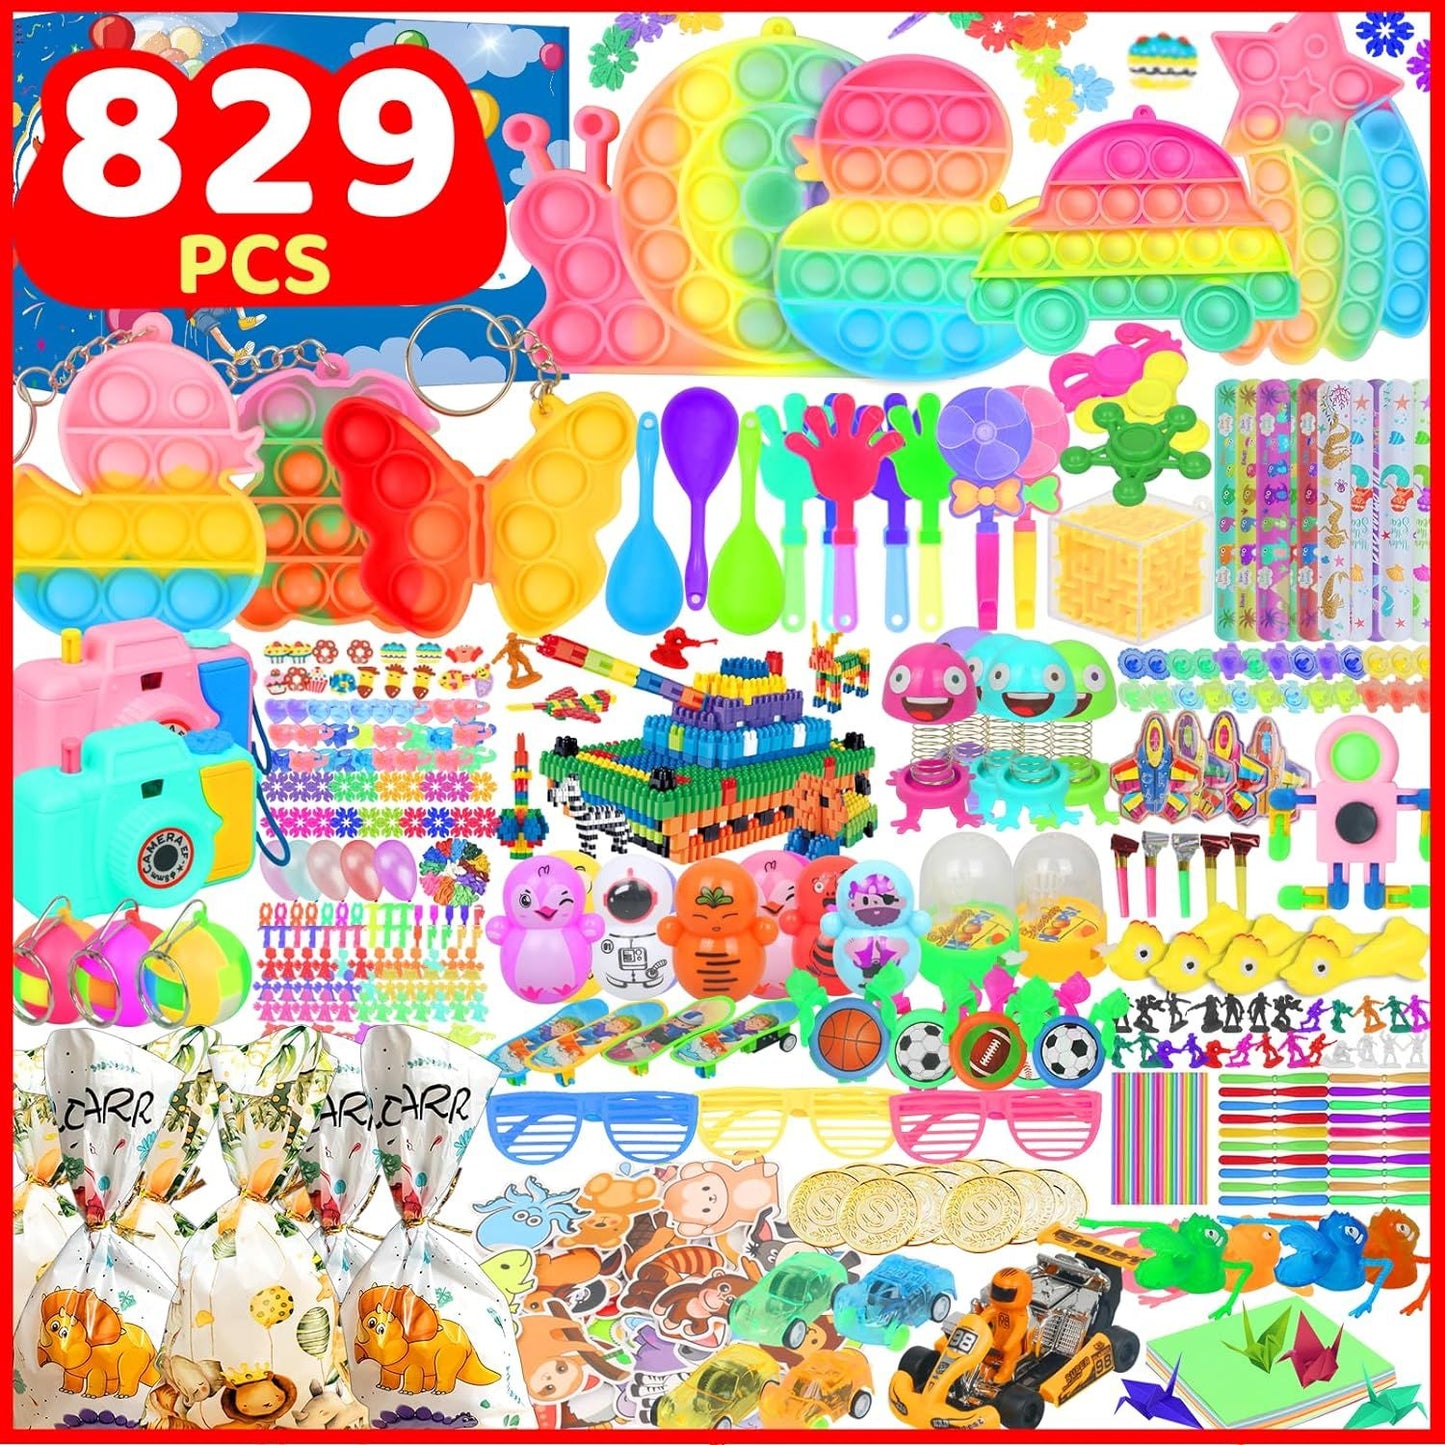 ZJLL 829 Pcs Party Favors For Kids-Fidget Toy Set-Birthday Gifts Toys For Kids